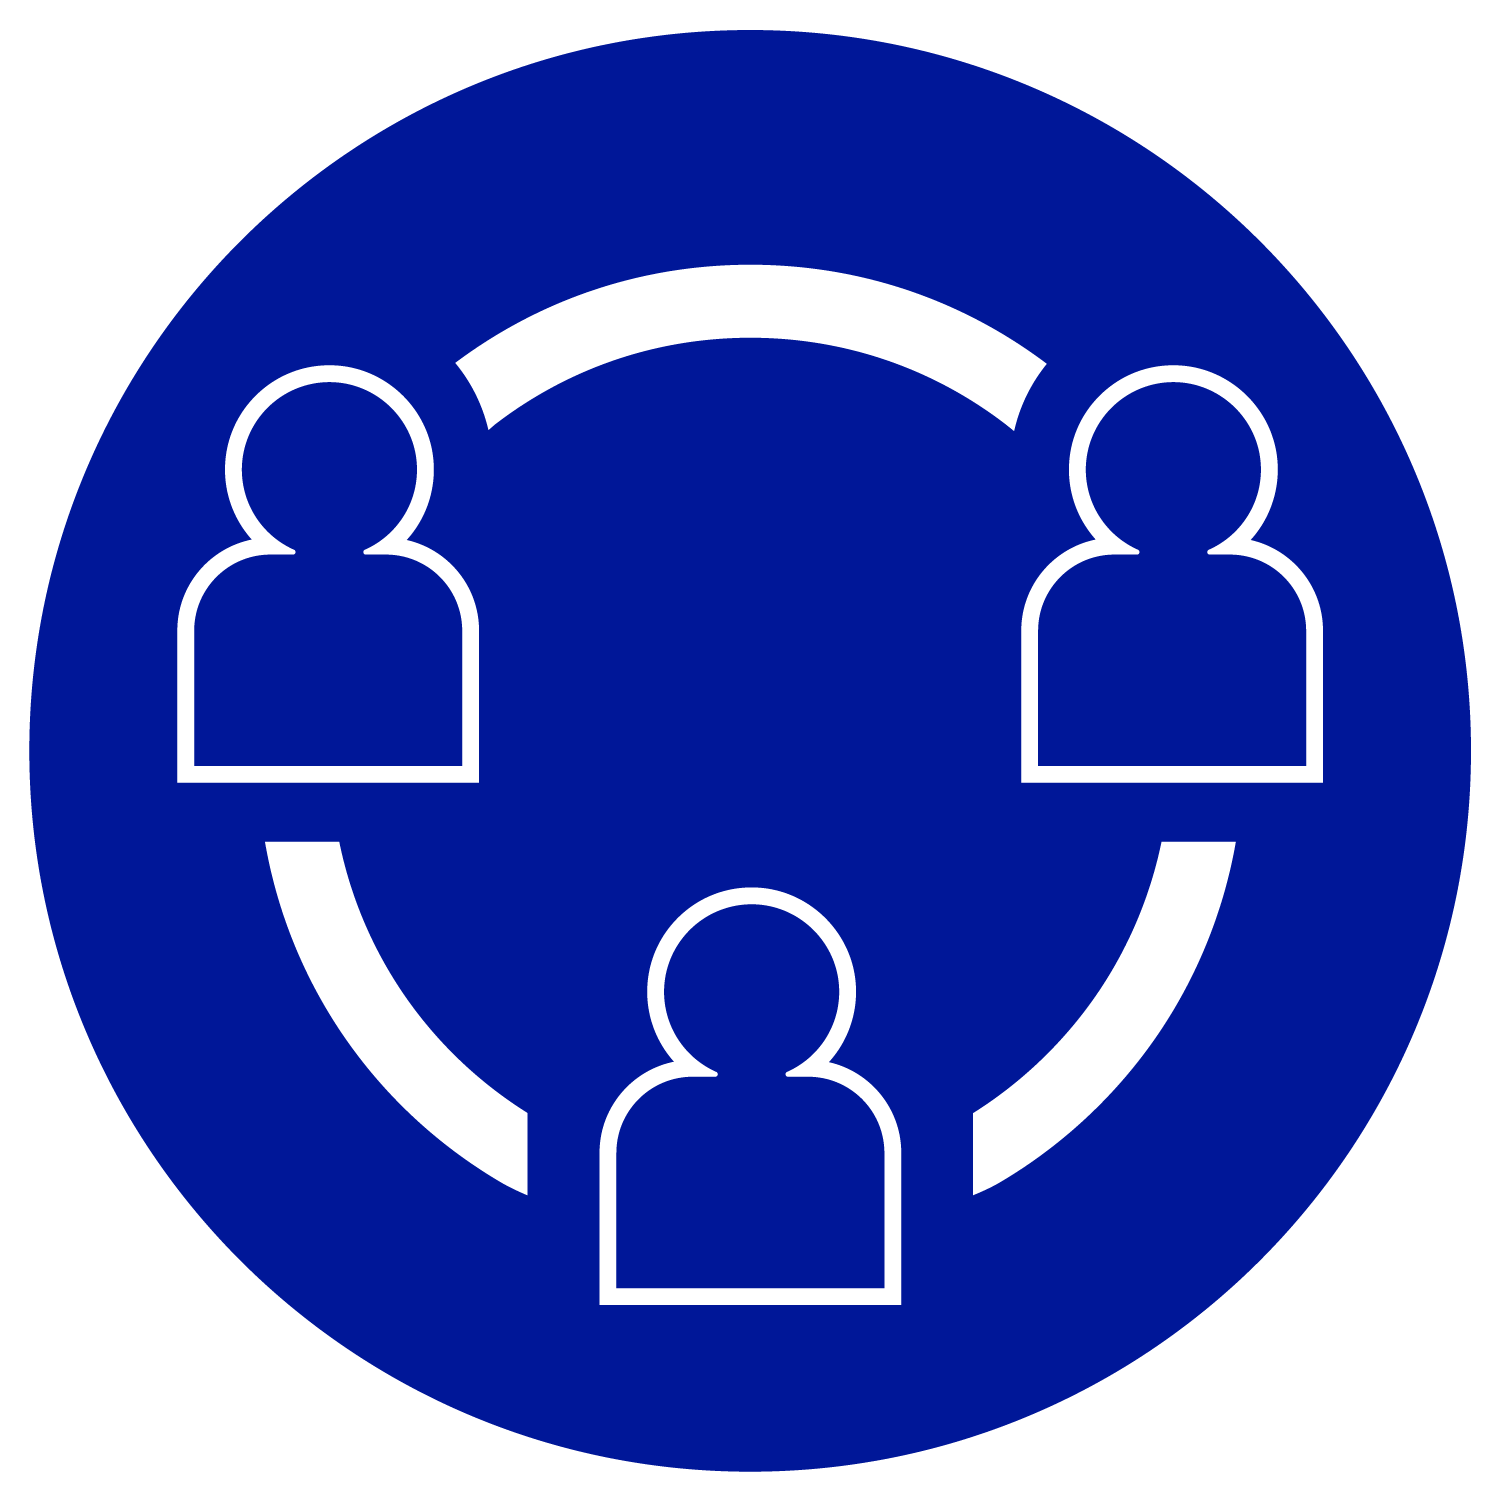 circular blue icon with the outlines of three figures (shoulders up) connected by curved, white lines